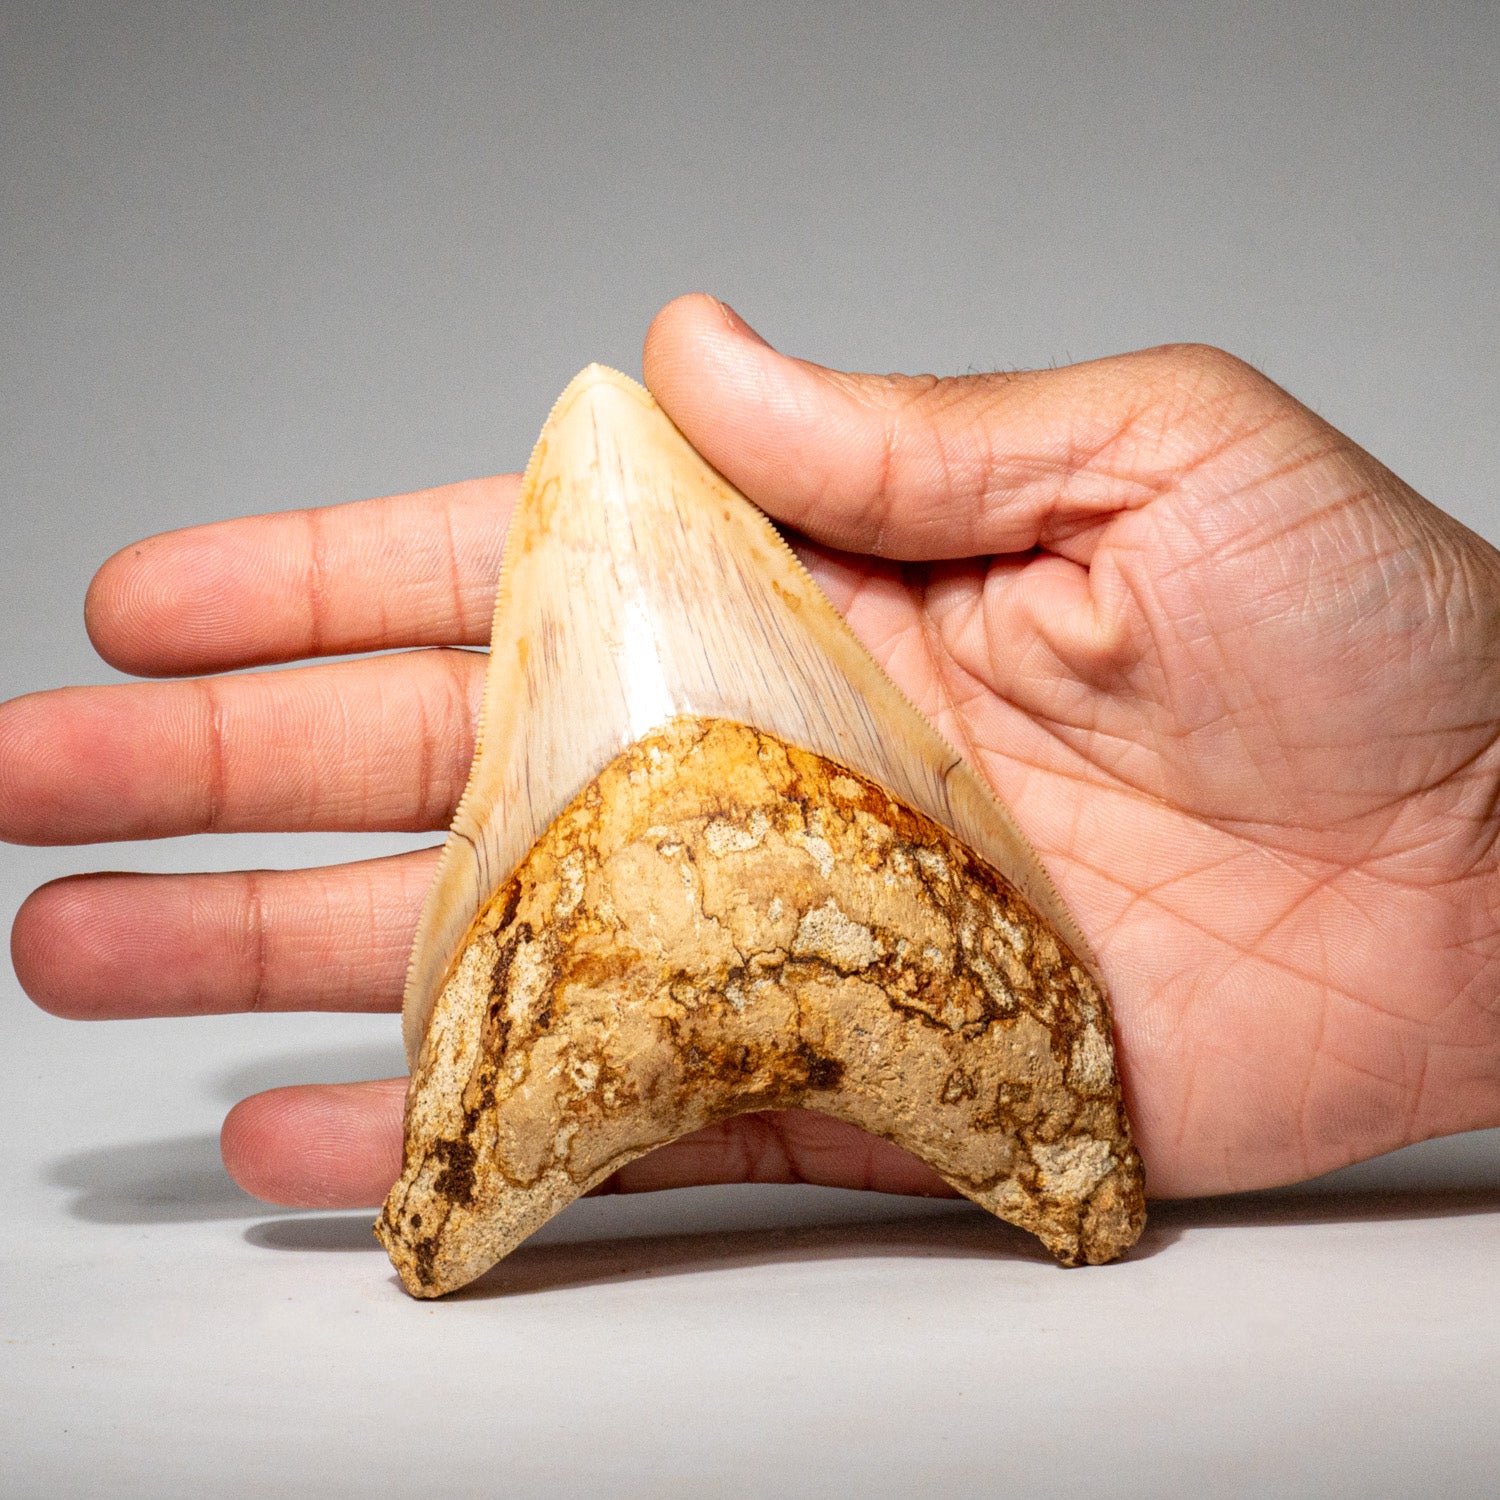 Large Genuine Megalodon Shark Tooth from Indonesia in Display Box (190 grams)